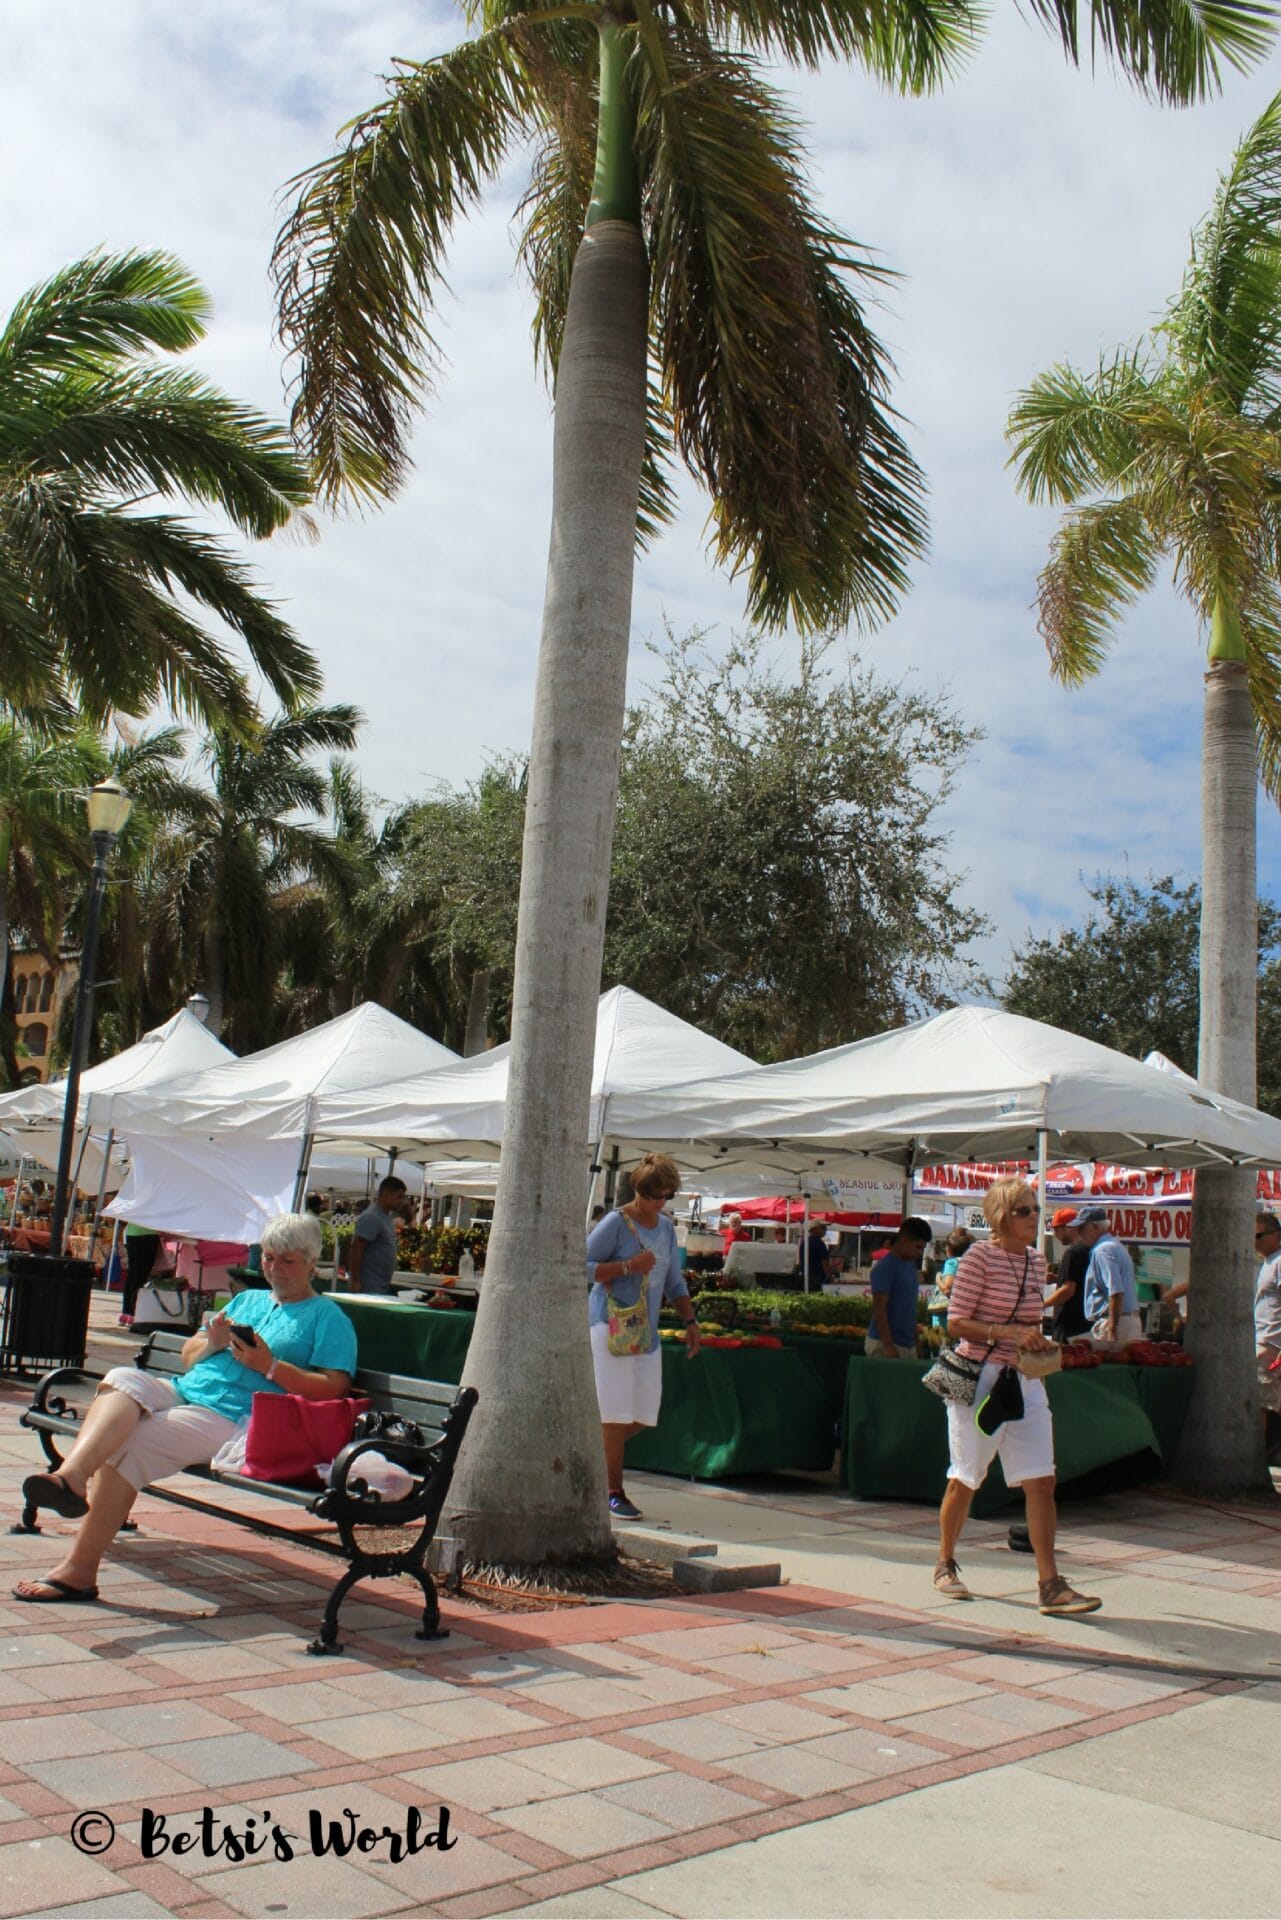  Palm trees and cloudy skies at Fort Pierce Farmers' Market with produce stands and people standing and sitting on benches. A great farmers' market for a weekend trip.